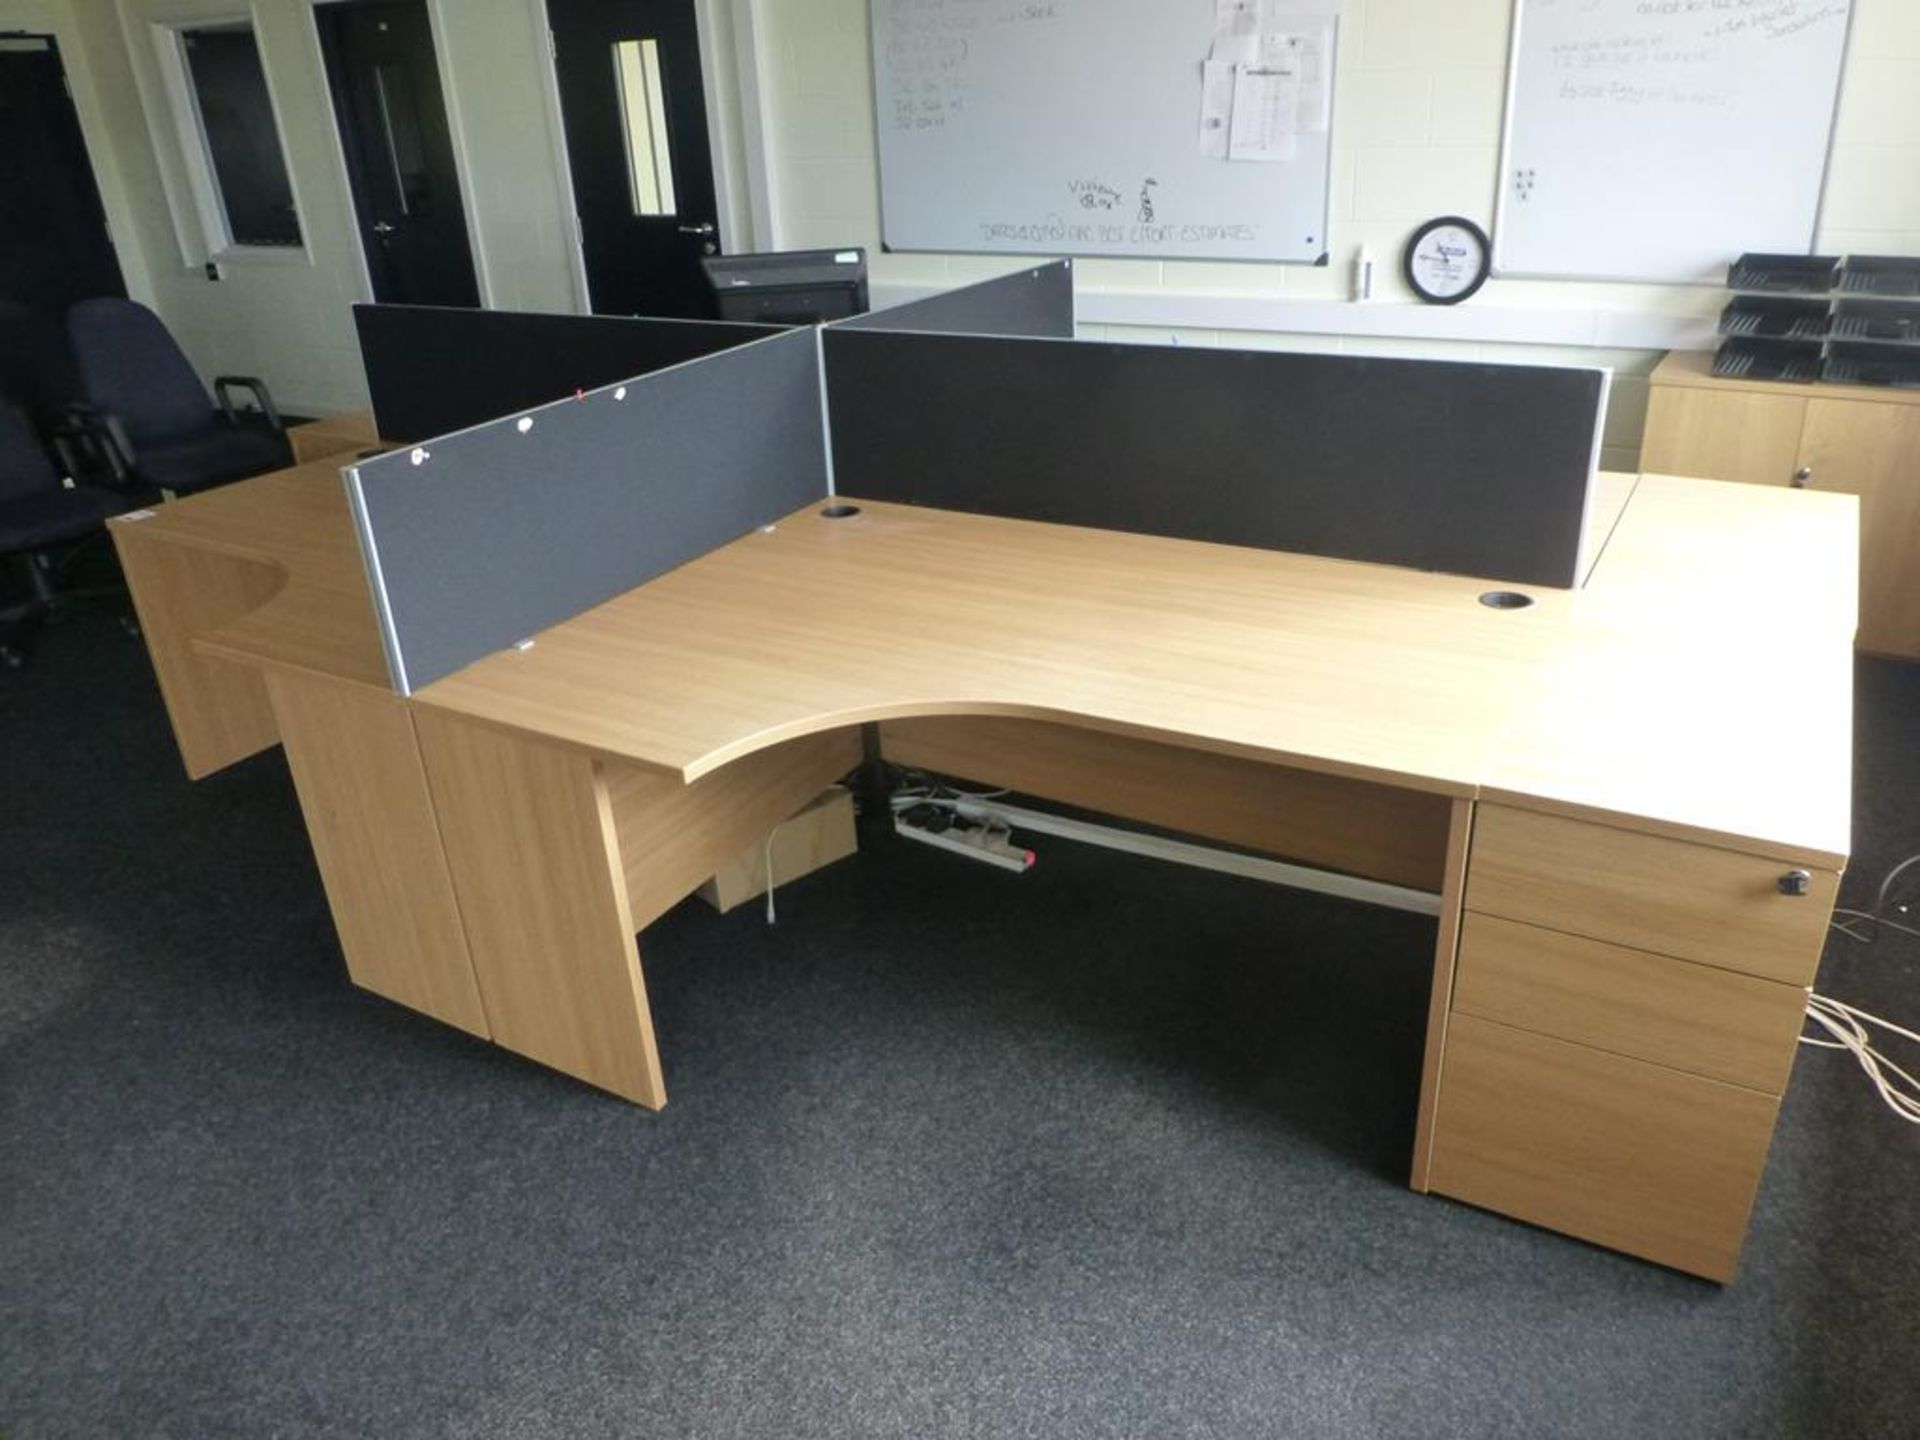 4 cherry effect 1600mm x 1200mm workstations with 3 matching 3 drawer pedestals and 4 x 400mm high